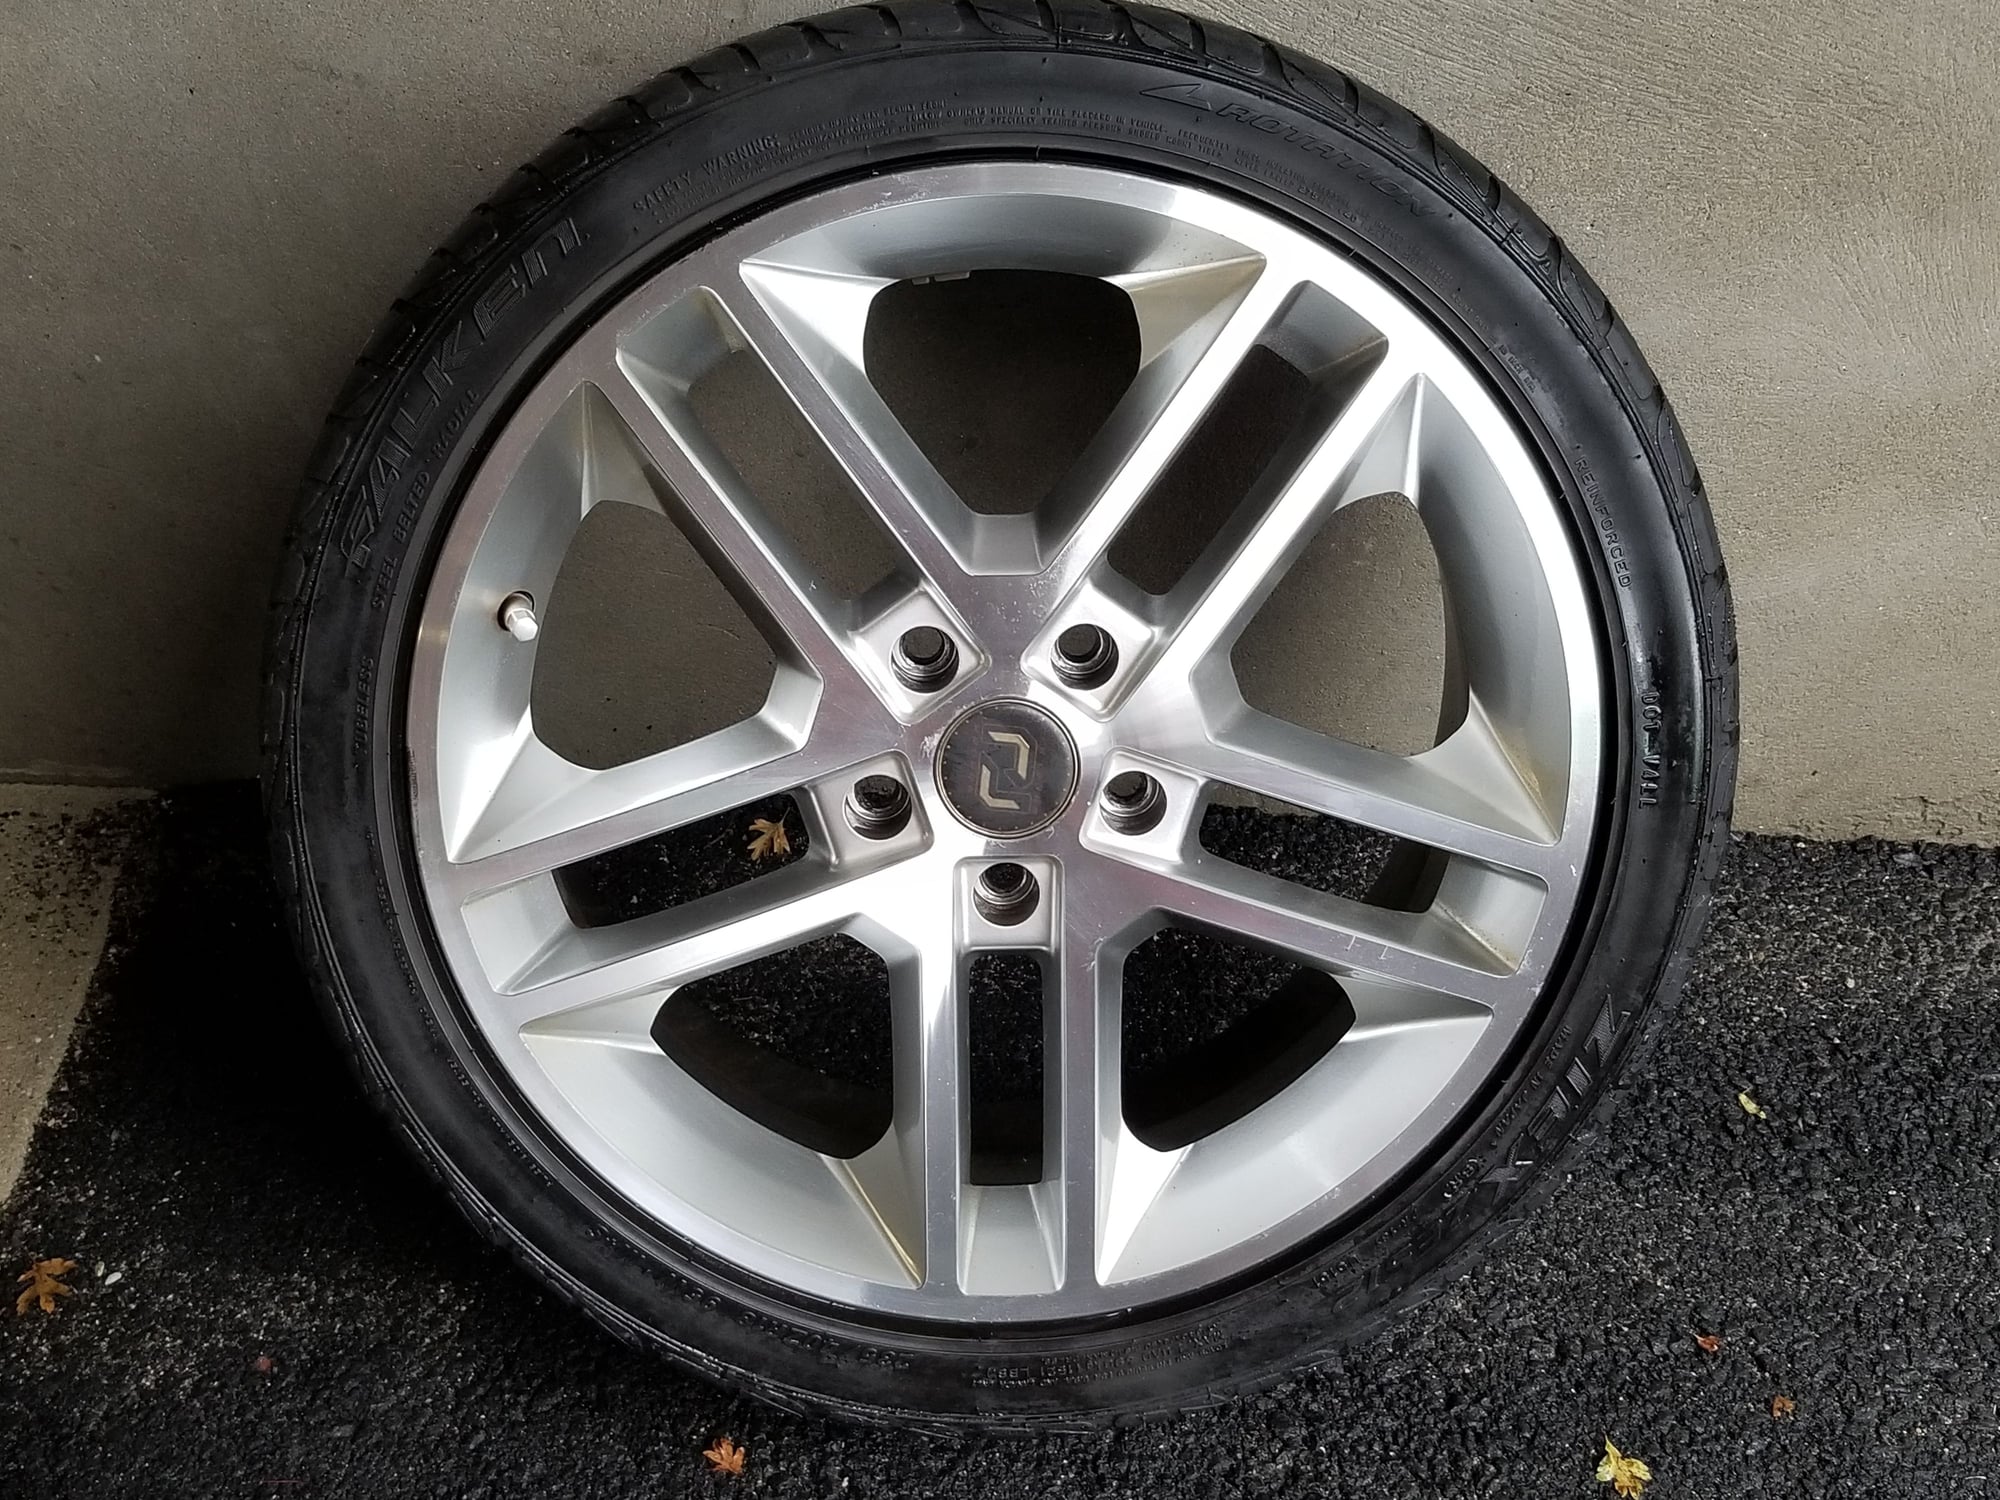 Wheels and Tires/Axles - SOLD: 5 18" Ronjon Inspyre wheels - Used - 2001 to 2003 Acura CL - 1999 to 2003 Acura TL - West Orange, NJ 07052, United States